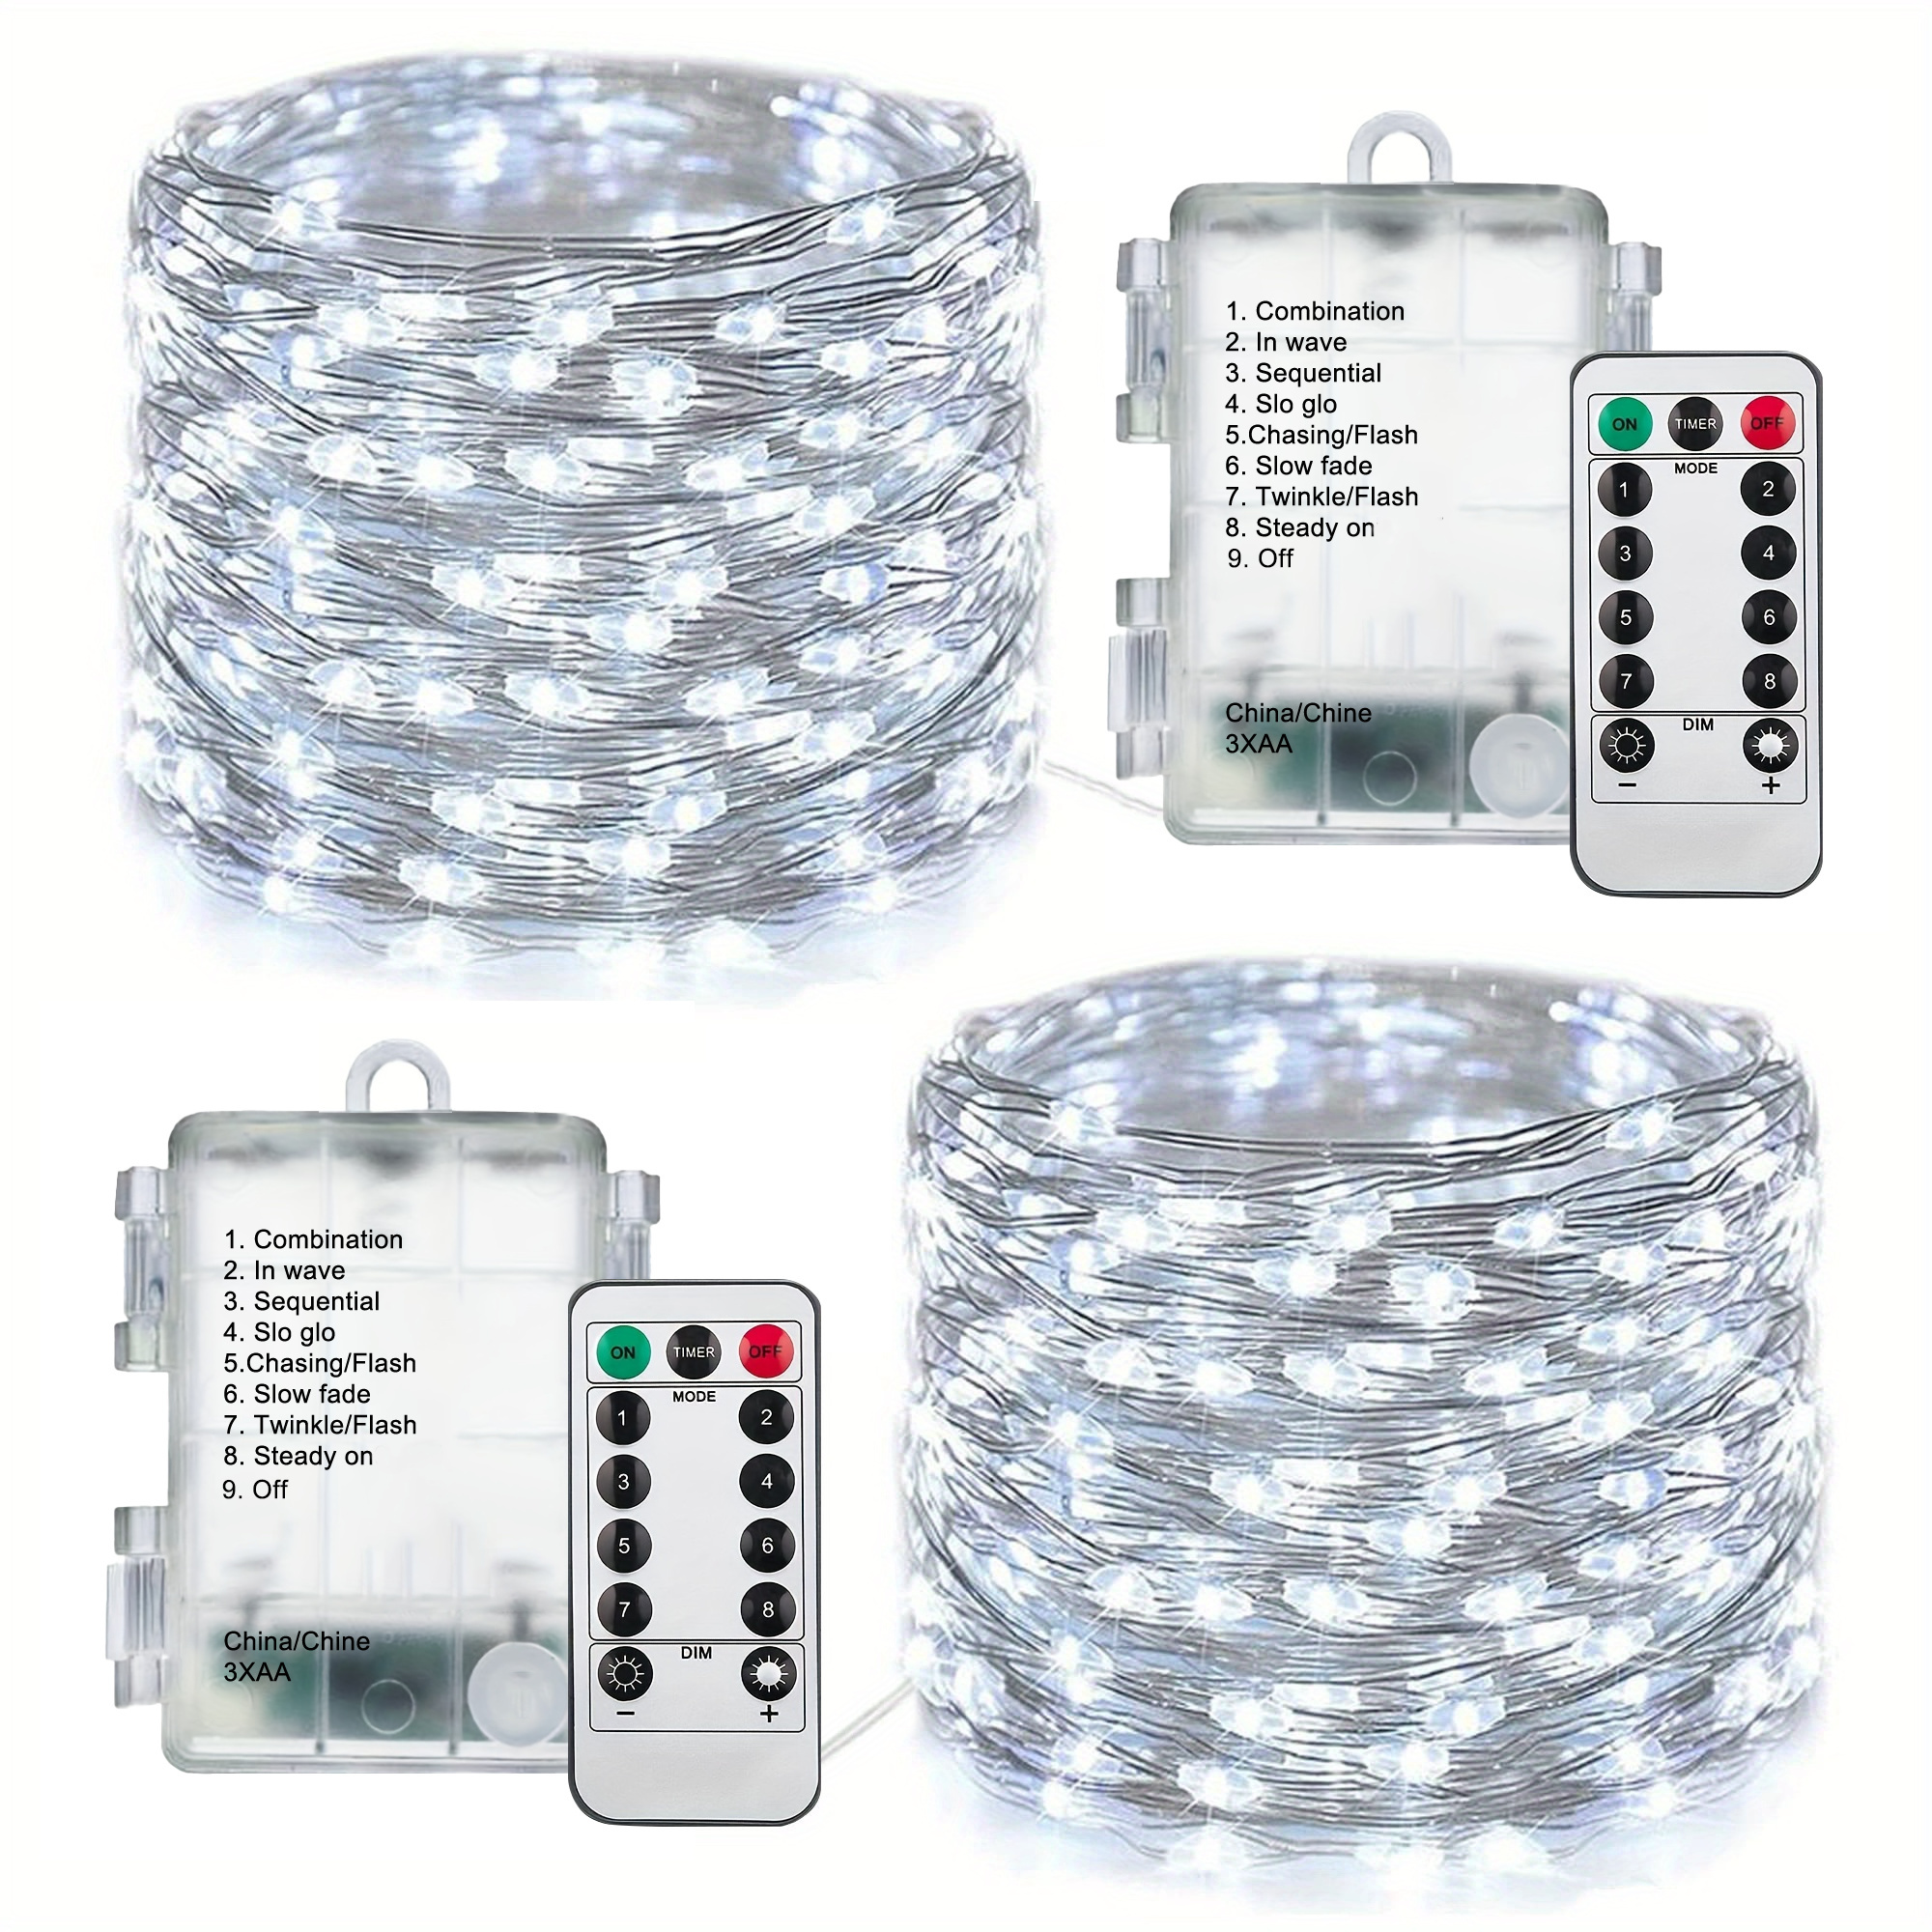 2 pack 32 8ft 100led fairy lights battery operated with remote control timer 8 modes waterproof copper wire twinkle string lights christmas lights for bedroom party indoor warm white multicolor cool white details 6